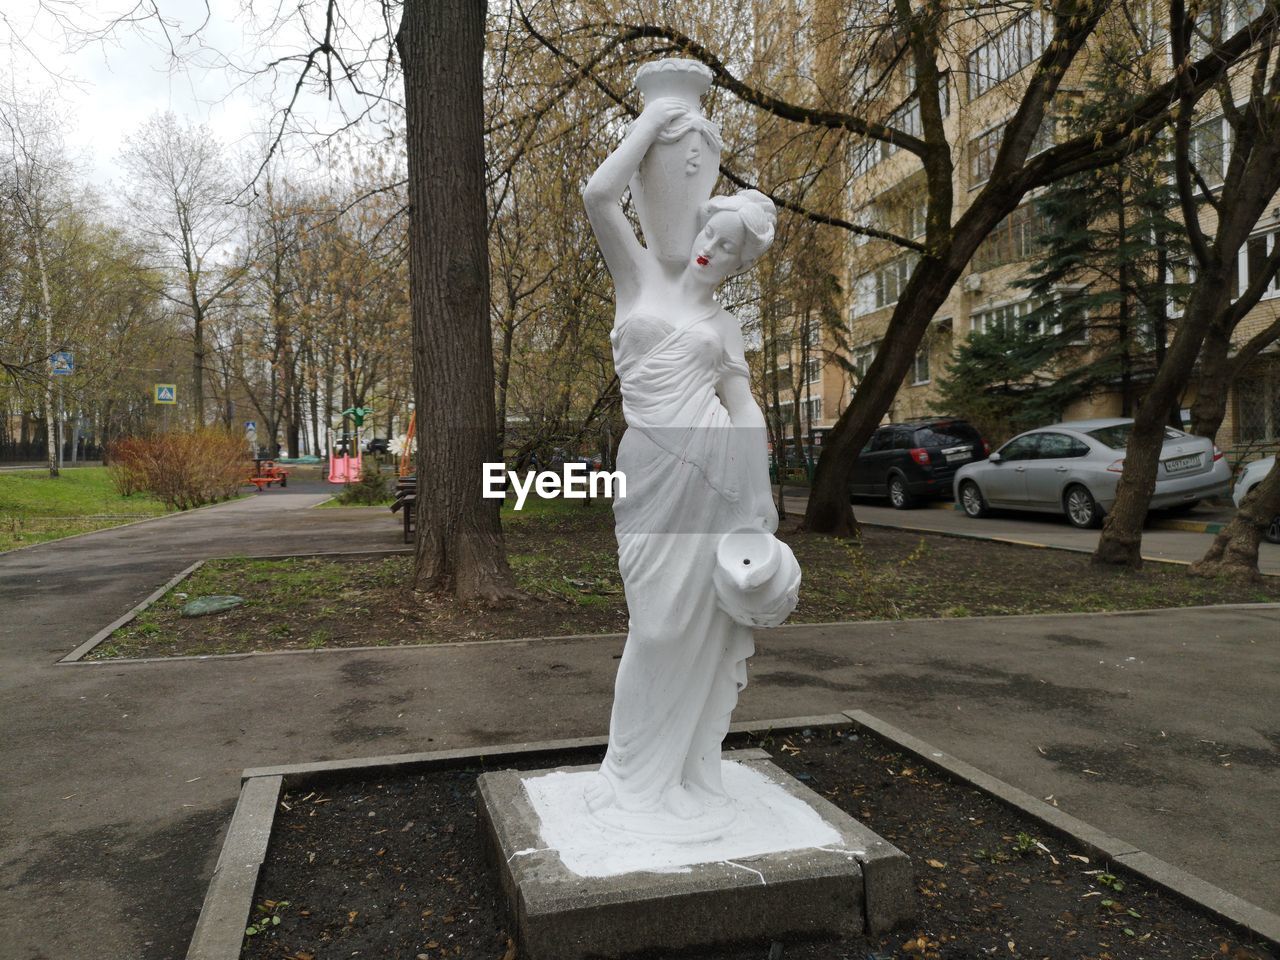 STATUE IN PARK BY CITY STREET